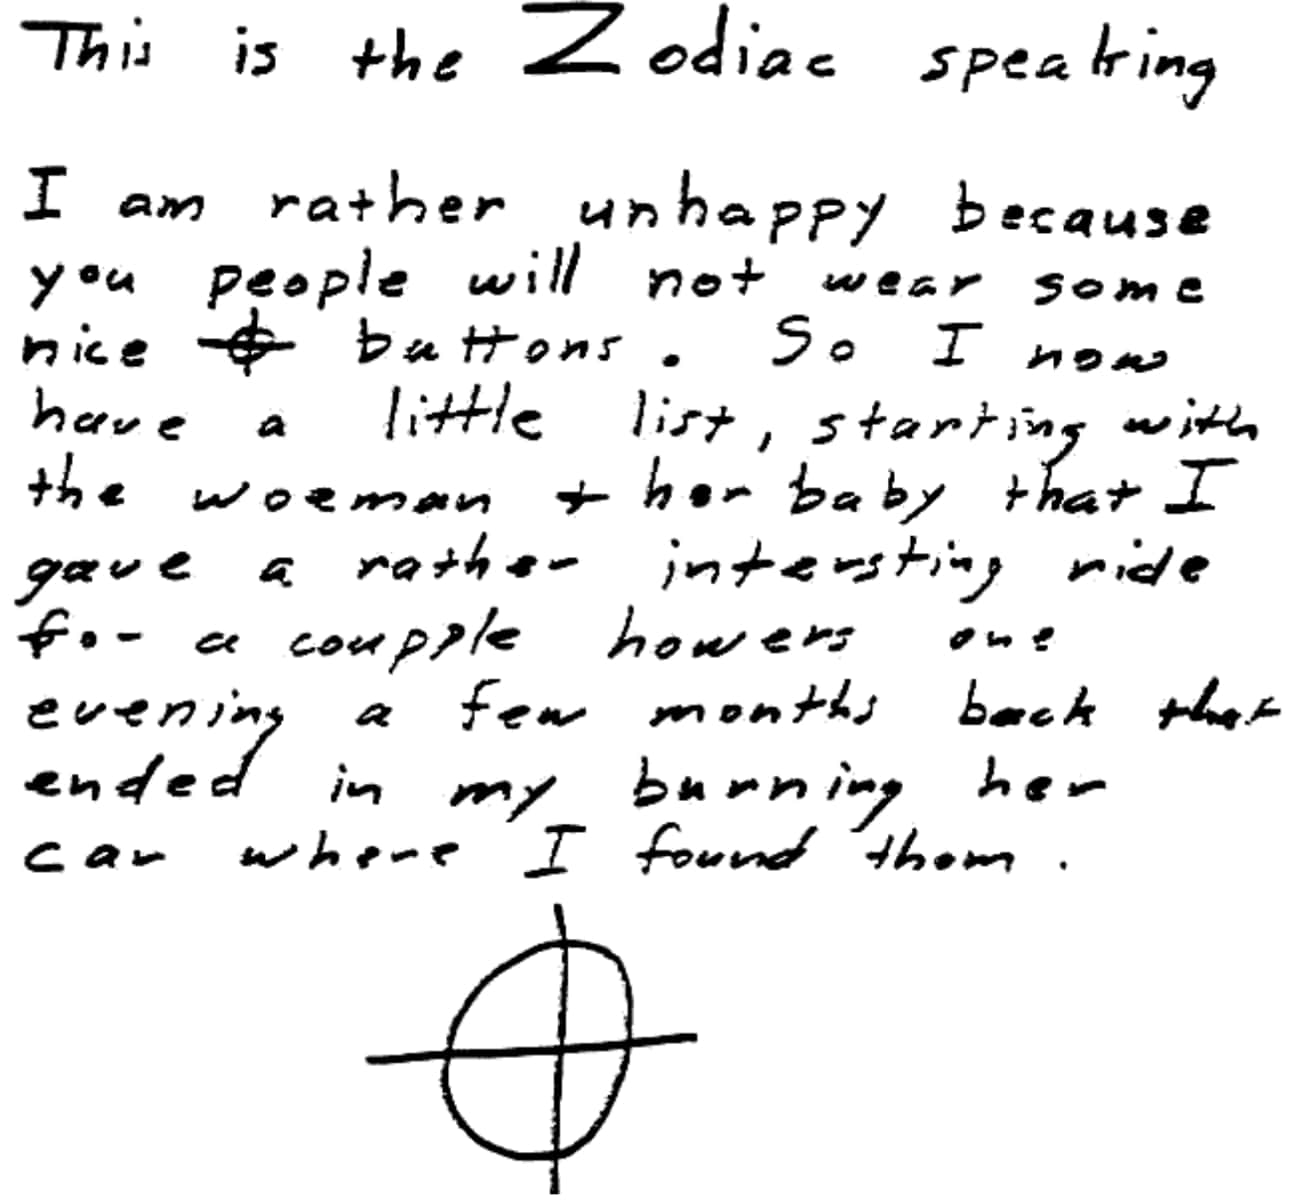 Did The Zodiac Eliminate Couples Because He'd Been Rejected?